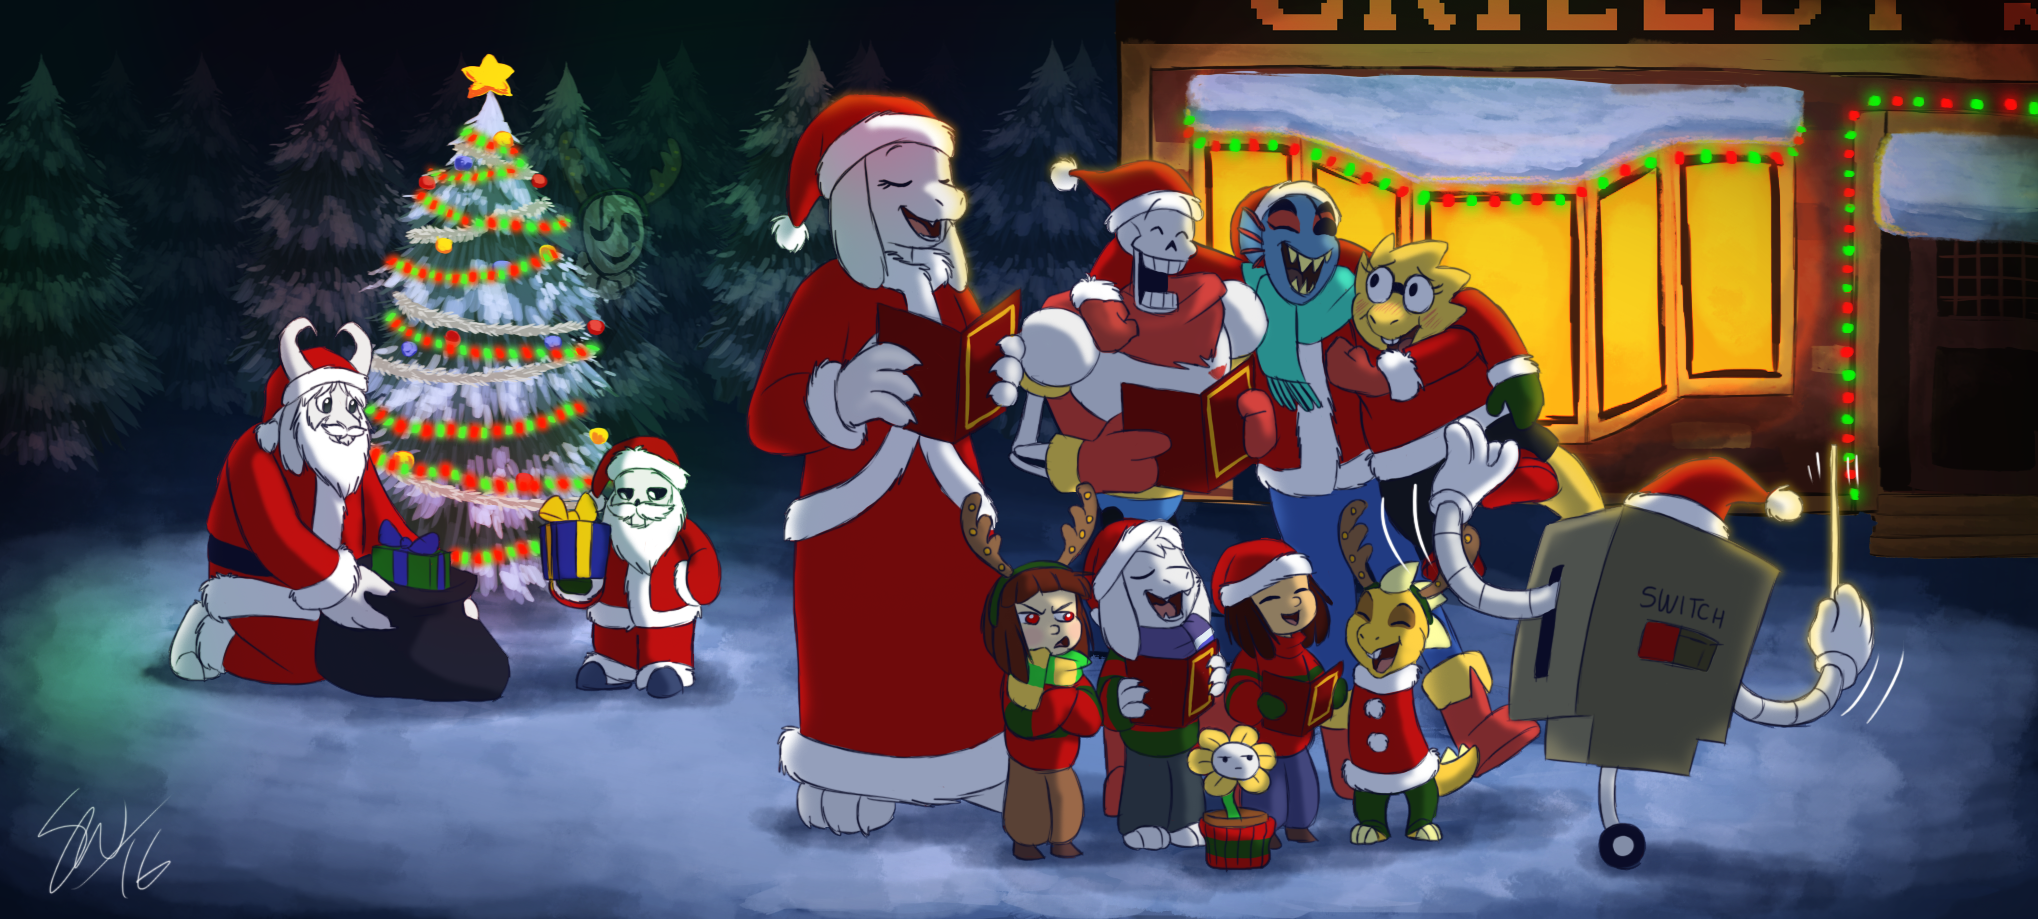 Undertale Christmas by TC-96